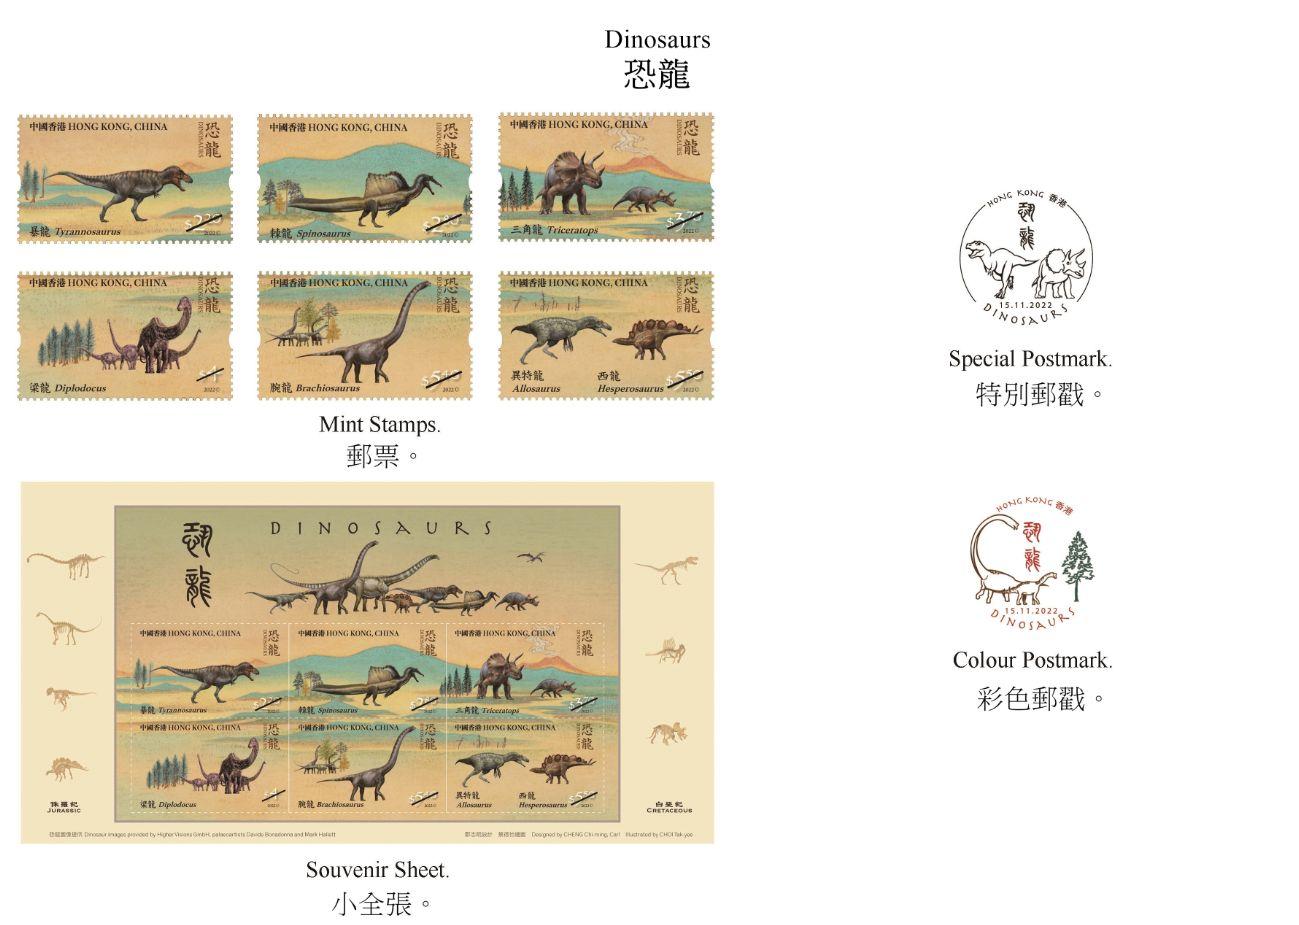 Hongkong Post will launch a special stamp issue and associated philatelic products on the theme of "Dinosaurs" on November 15 (Tuesday). Picture shows the mint stamps, the souvenir sheet, the special postmark and the colour postmark.